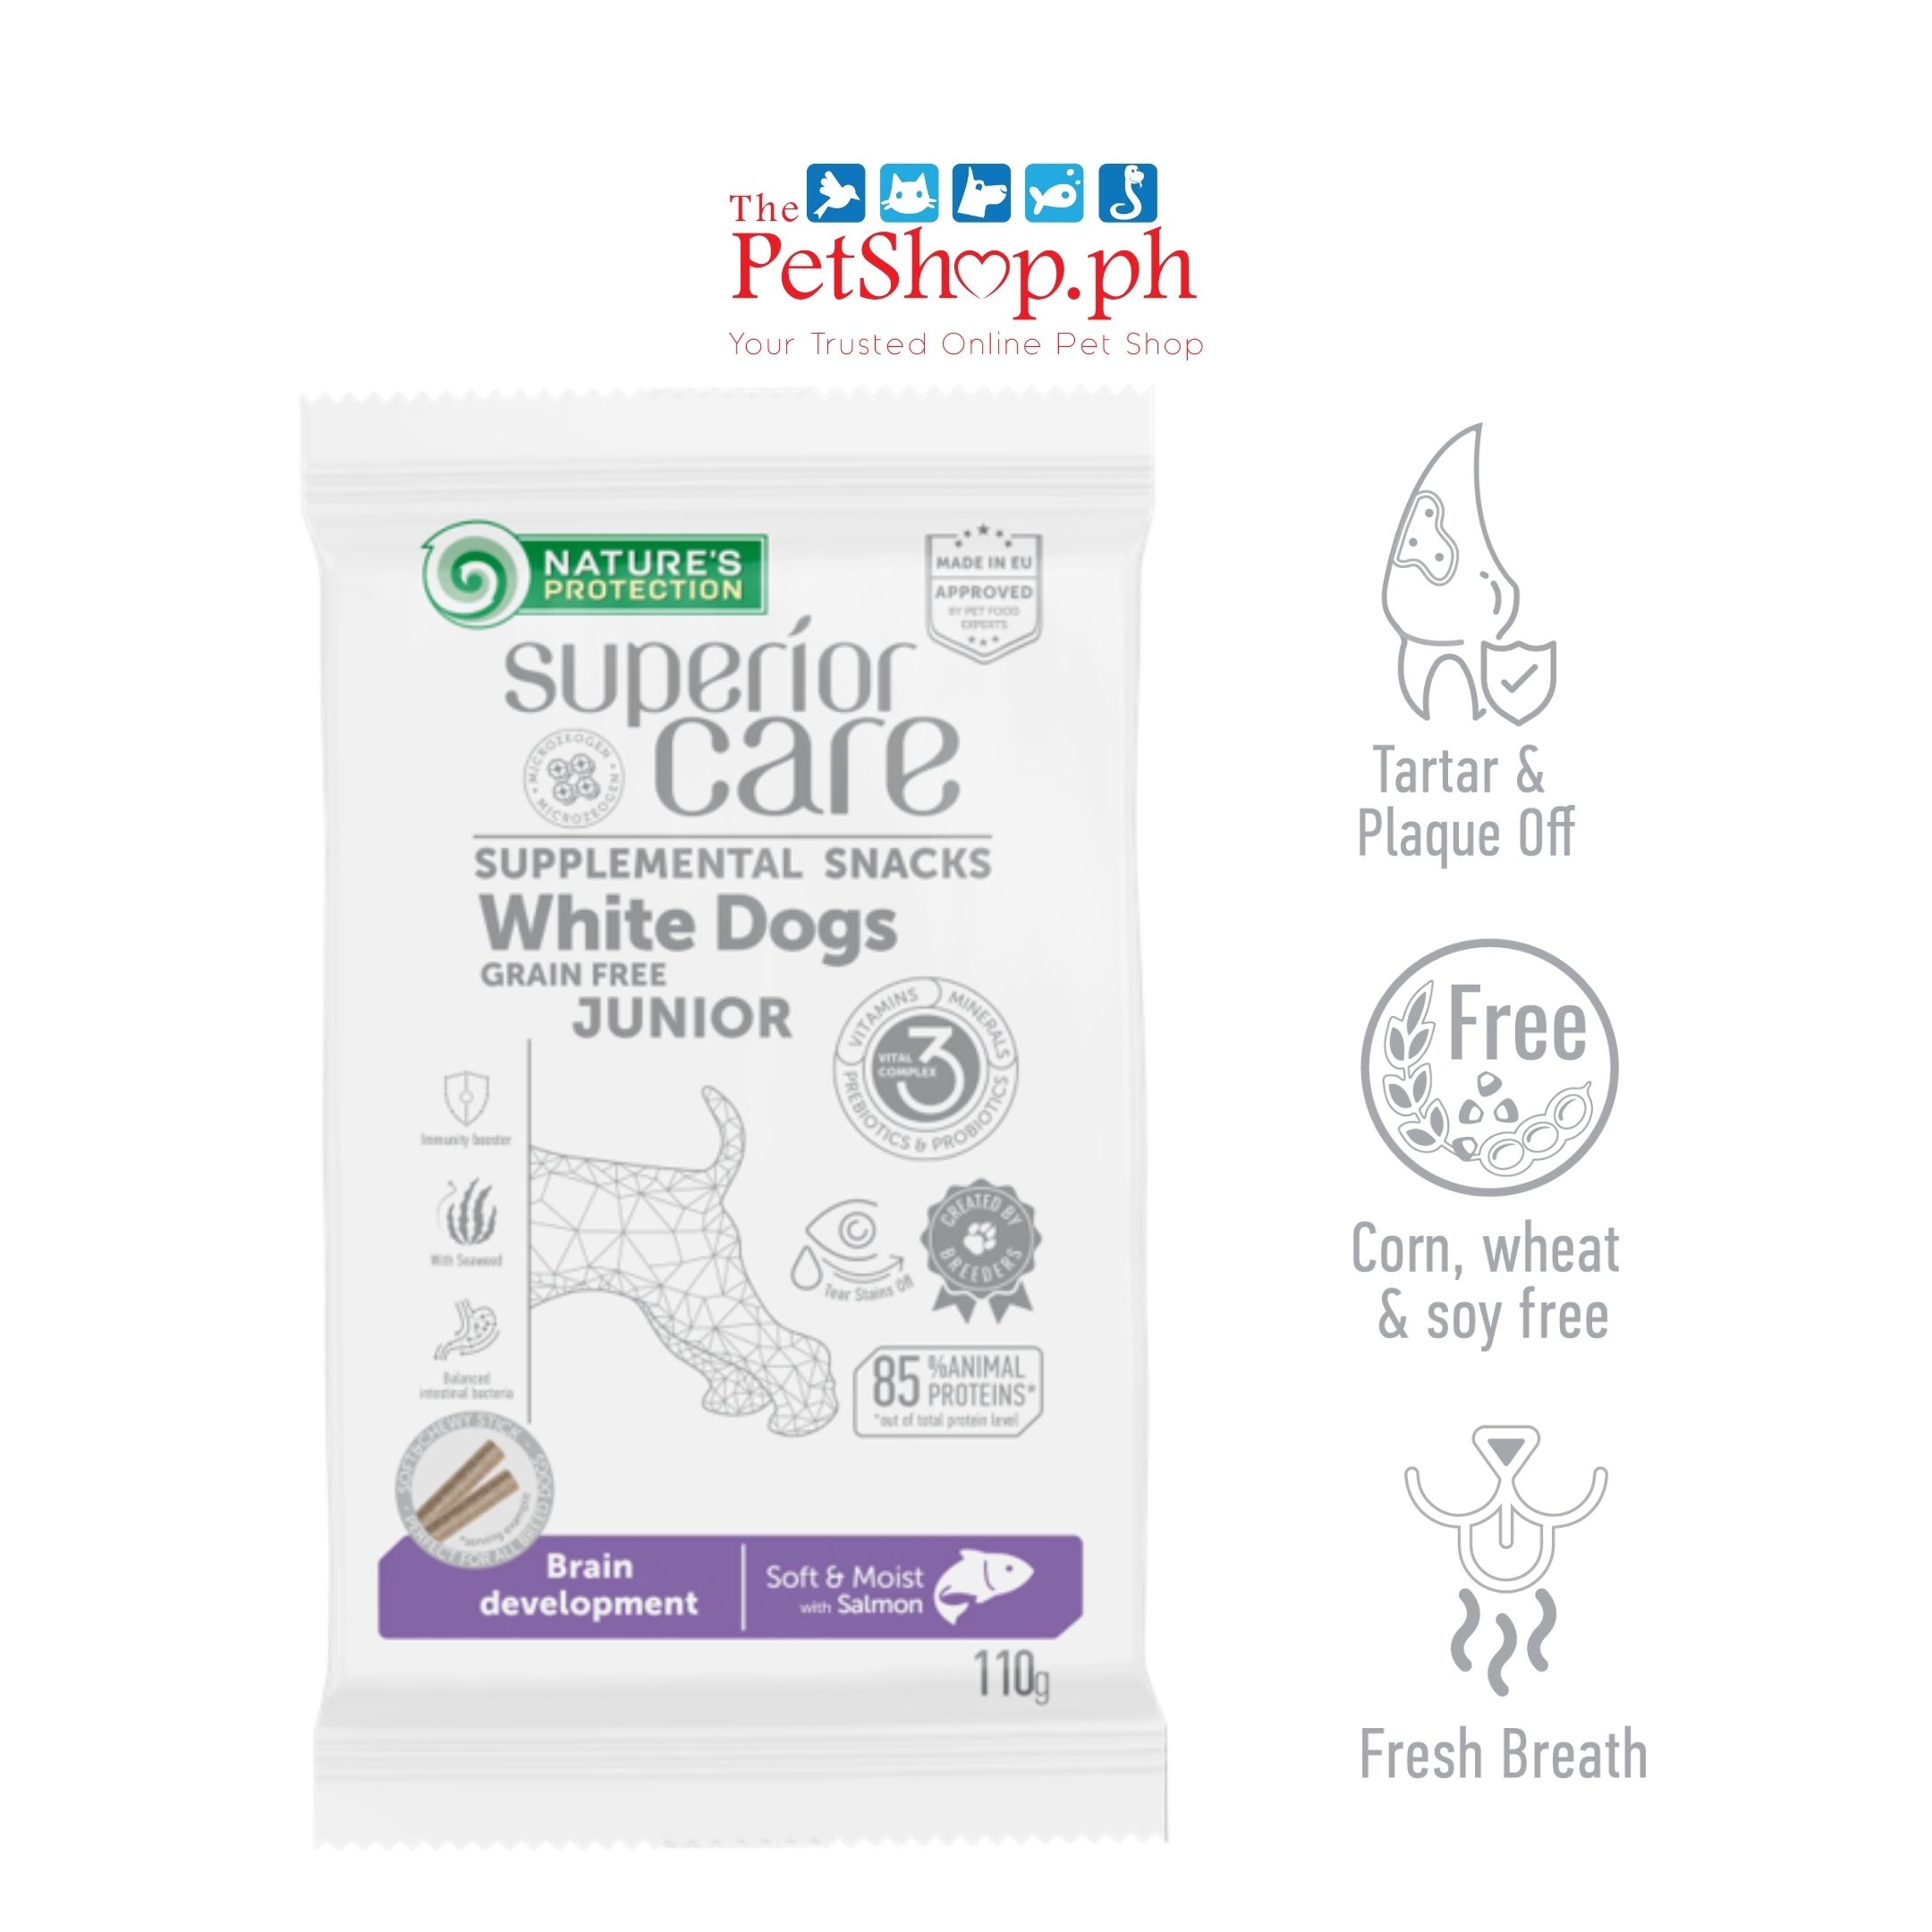 Nature's Protection Superior Care Supplemental Snacks for White Dogs - Brain Development 110g	